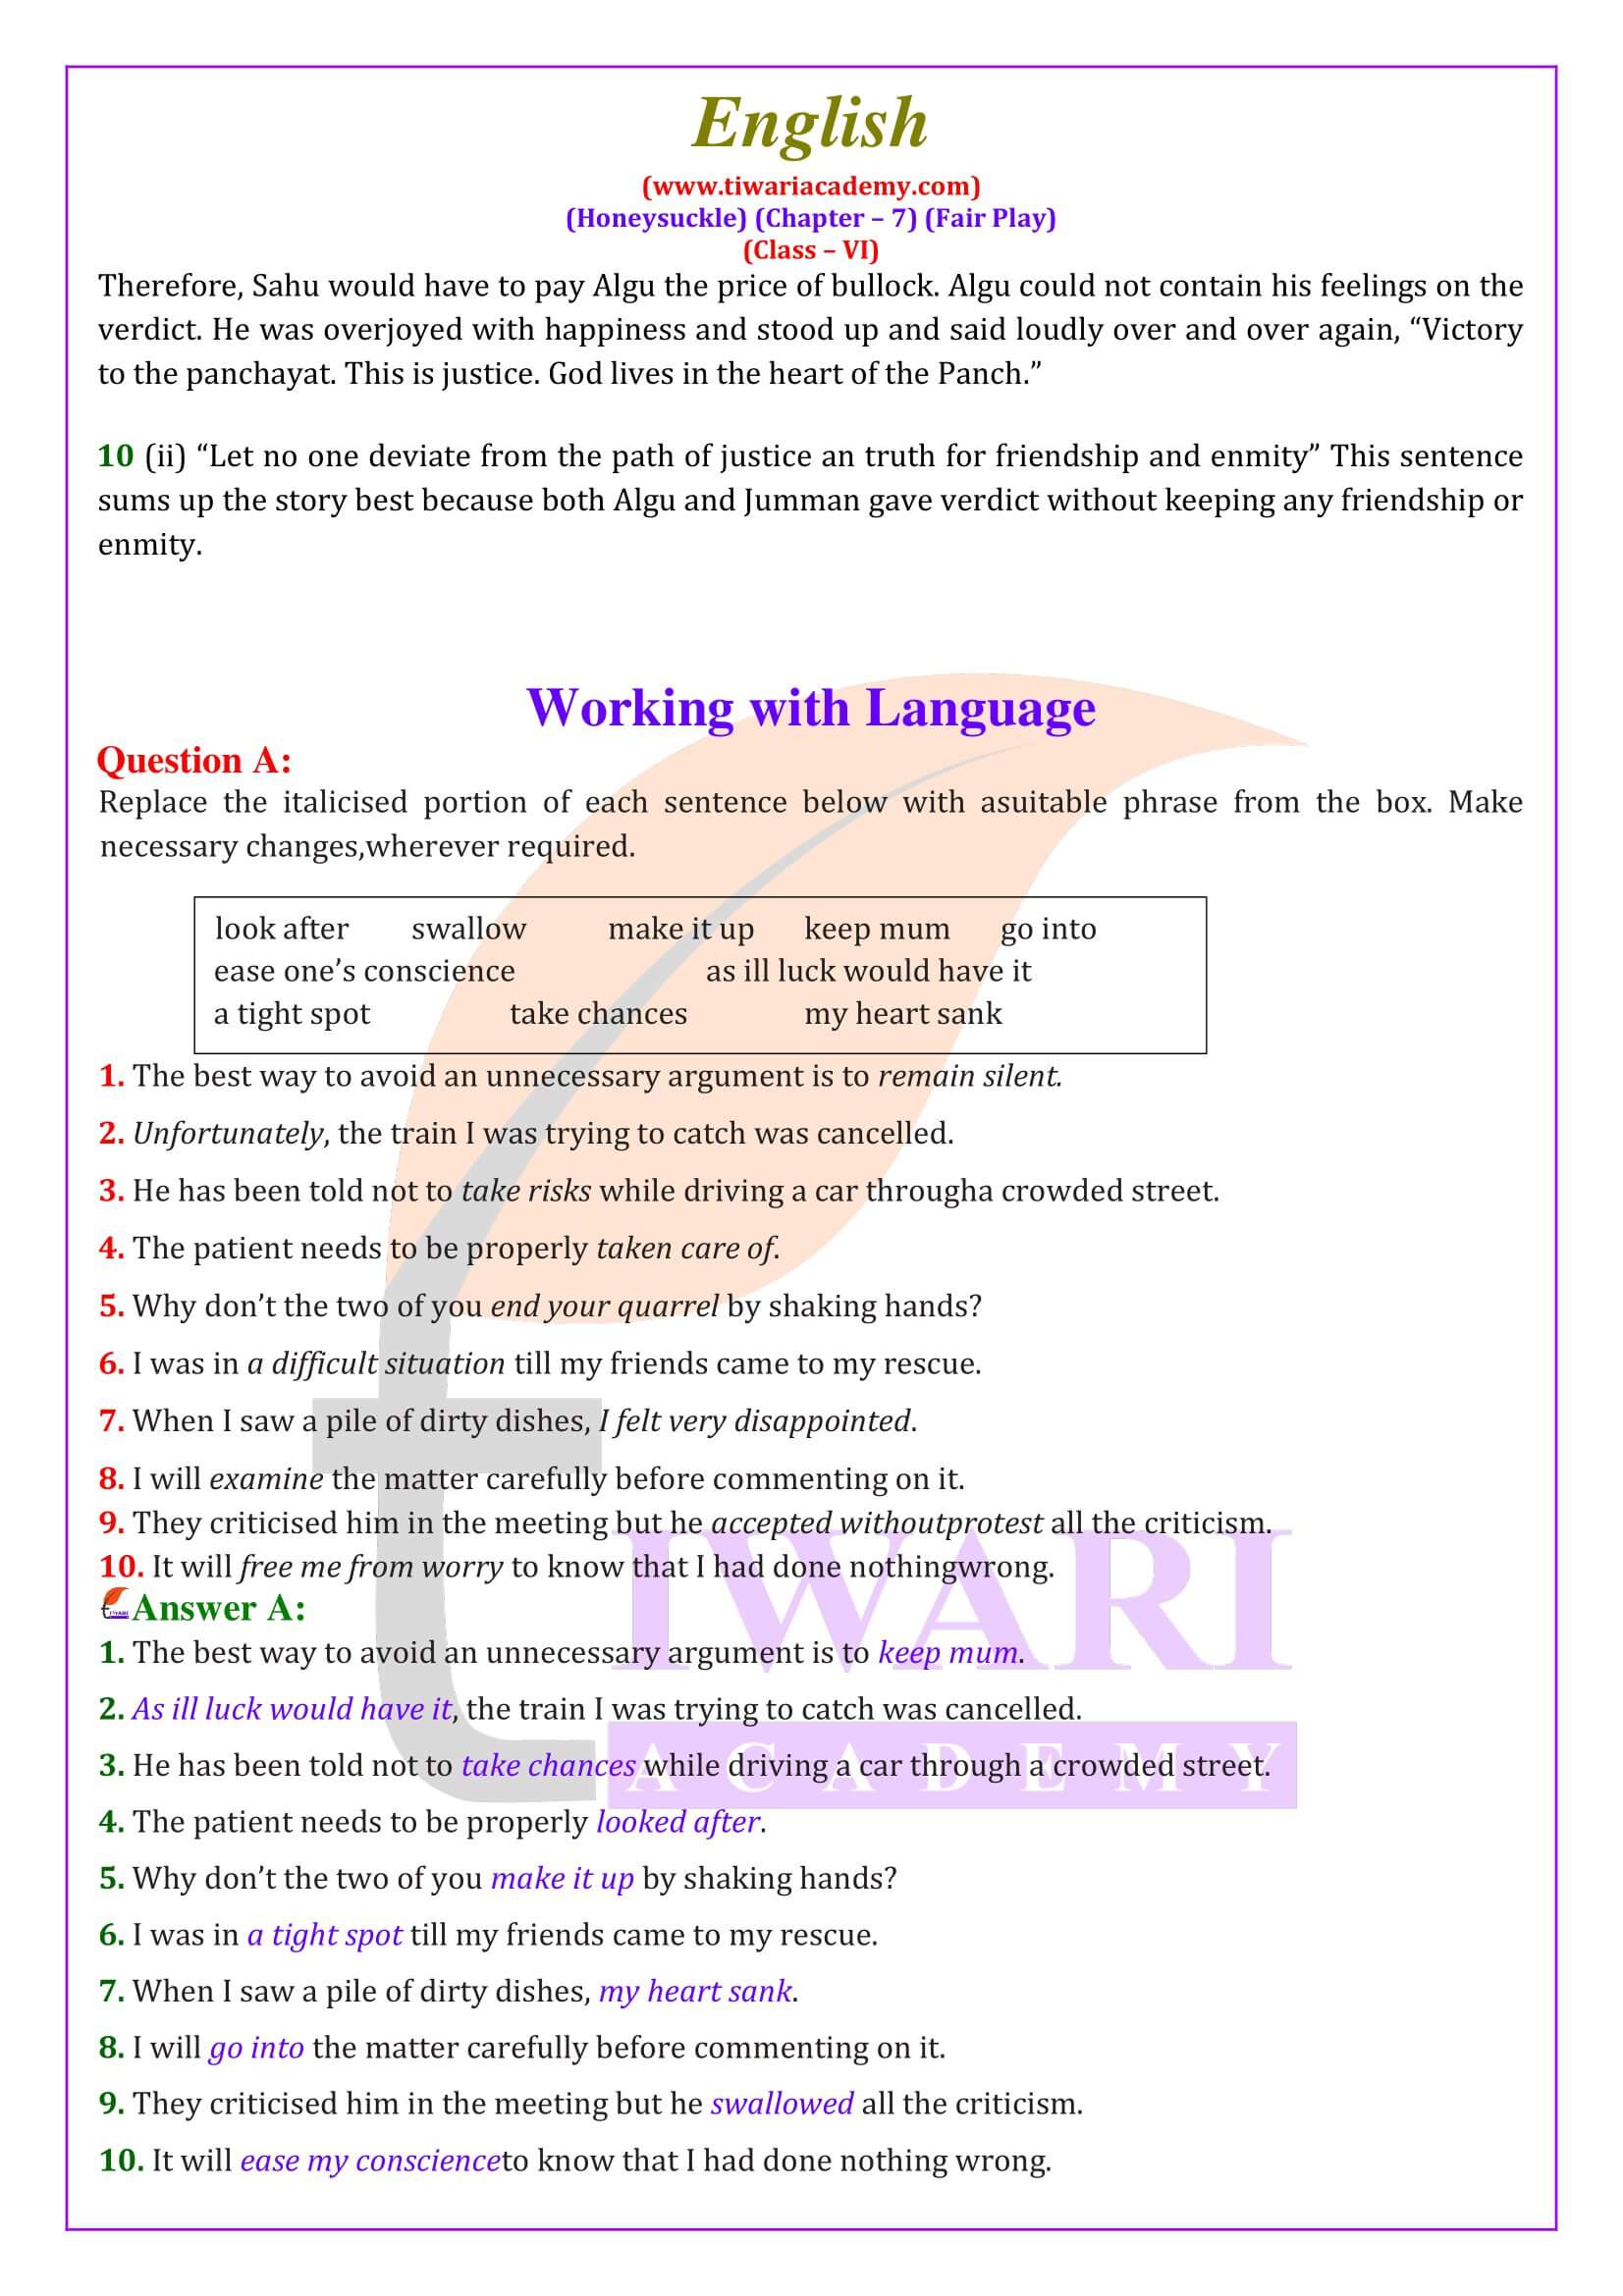 NCERT Solutions for Class 6 English Honeysuckle Chapter 7 revised